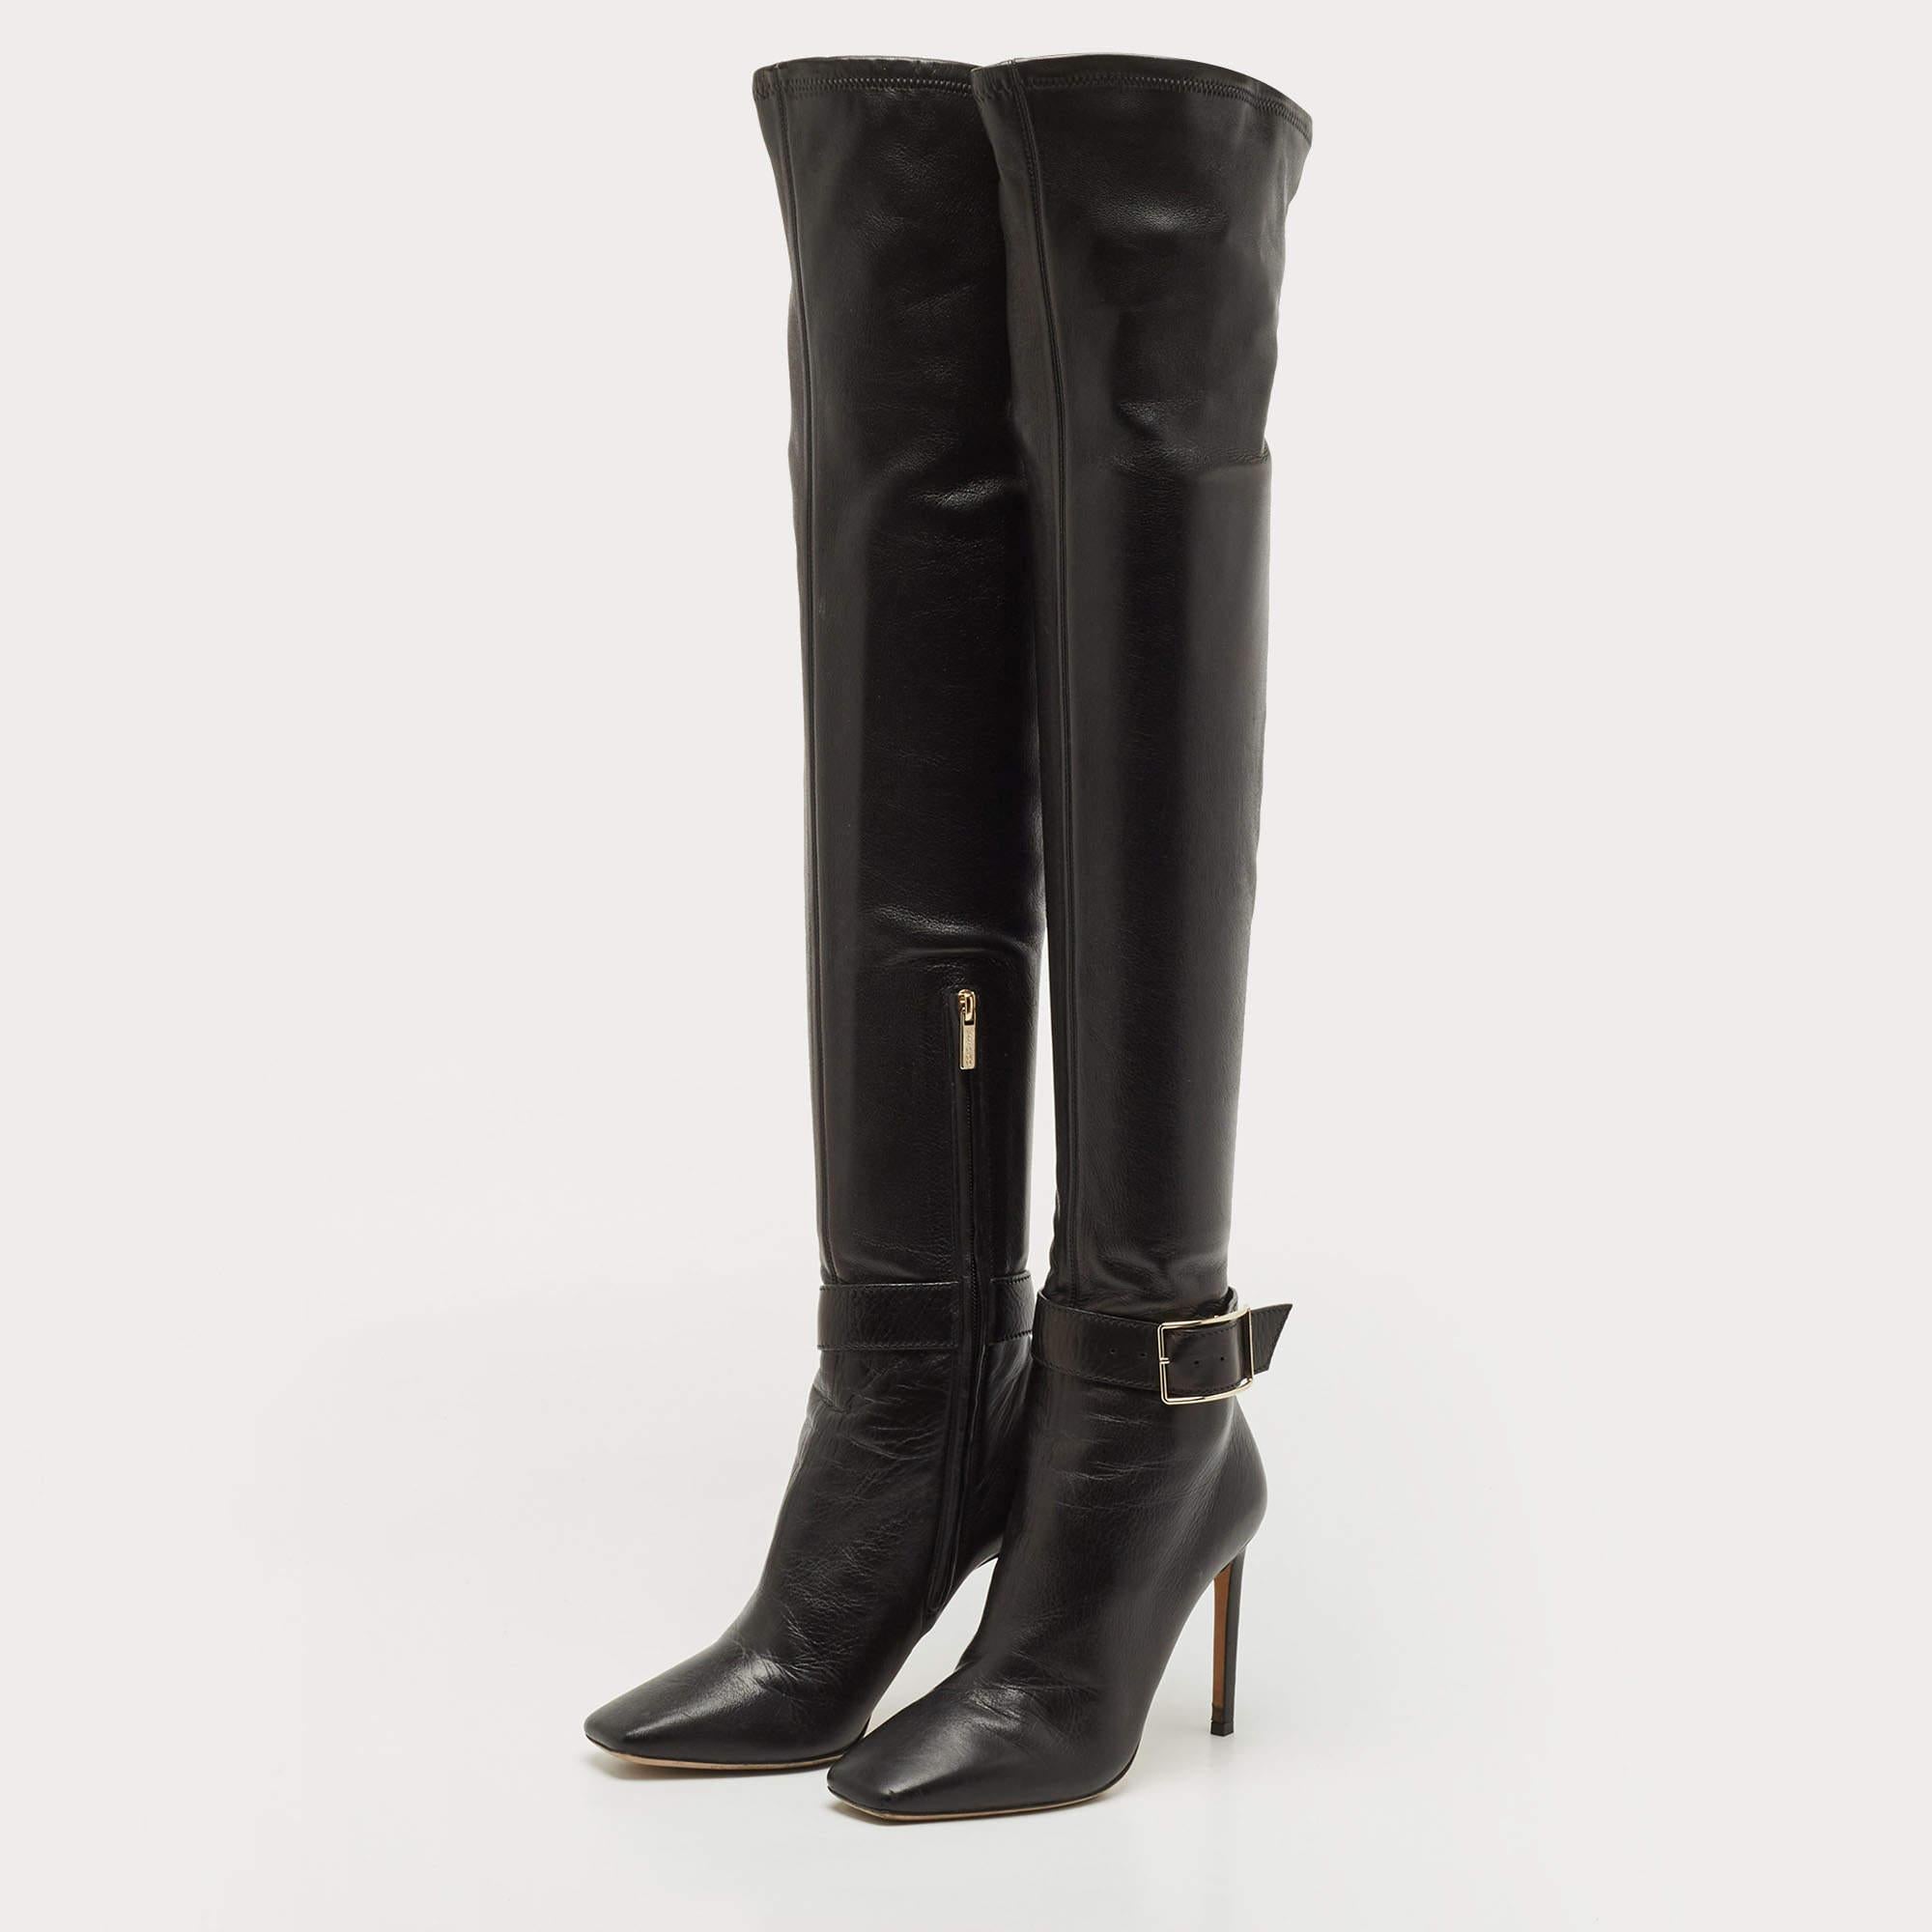 Women's Jimmy Choo Black Leather Knee Length Boots Size 38